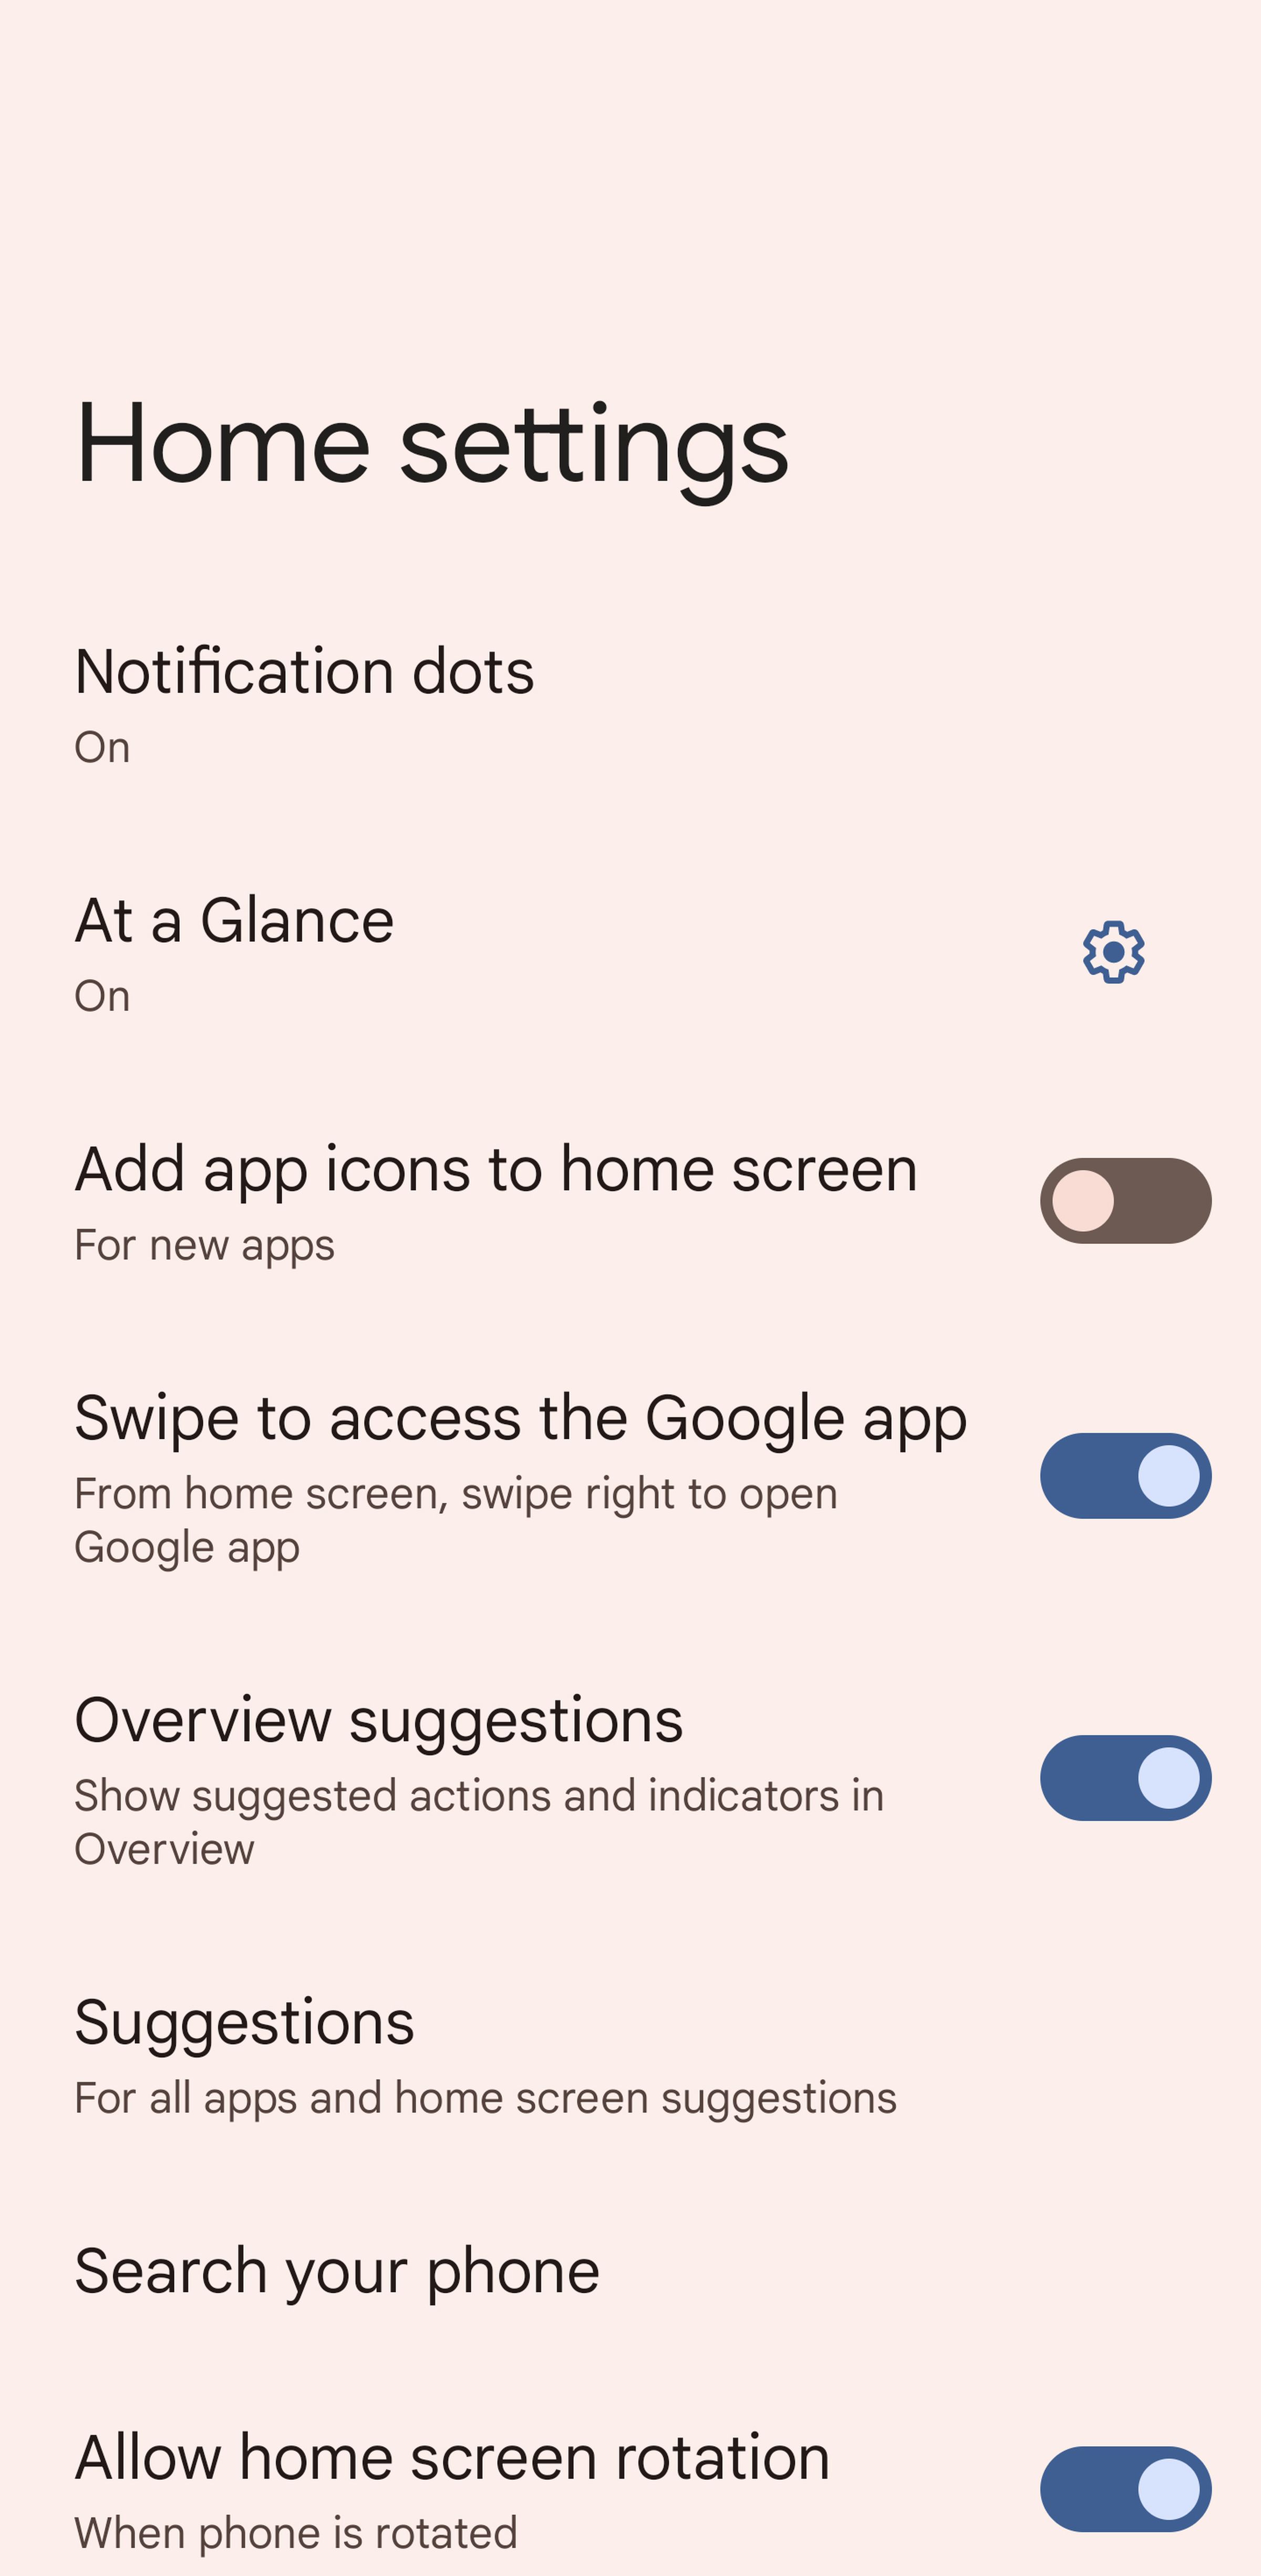 Home settings page listing Notification dots, At a Glance, Add app icons to home screen, Swipe to access the Google app, Overview suggestions.